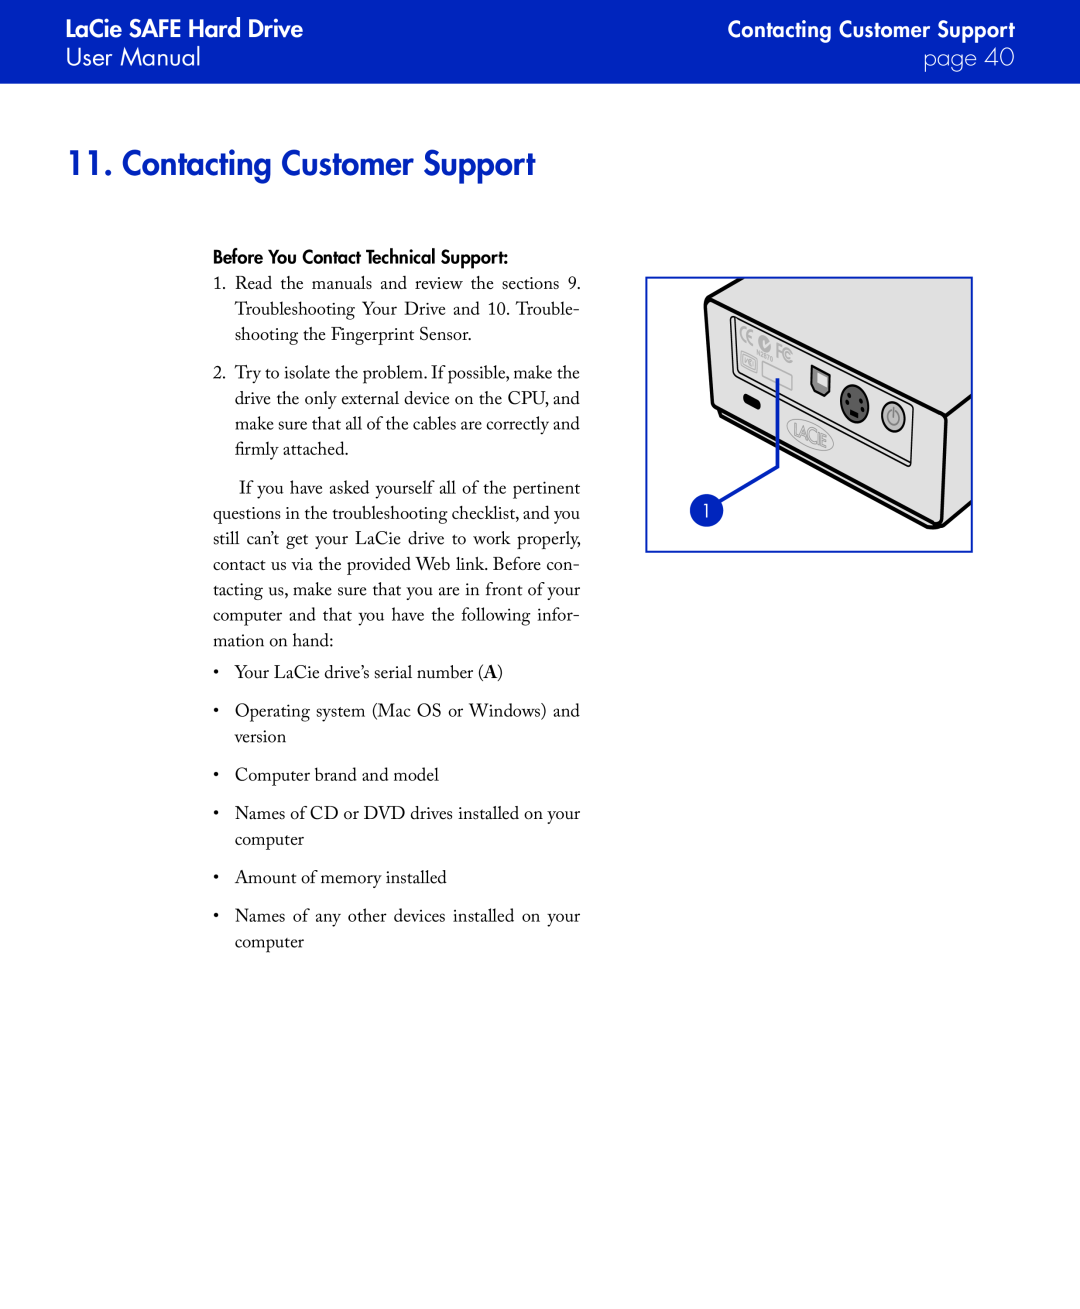 LaCie manual Contacting Customer Support, LaCie SAFE Hard Drive User Manual, page 